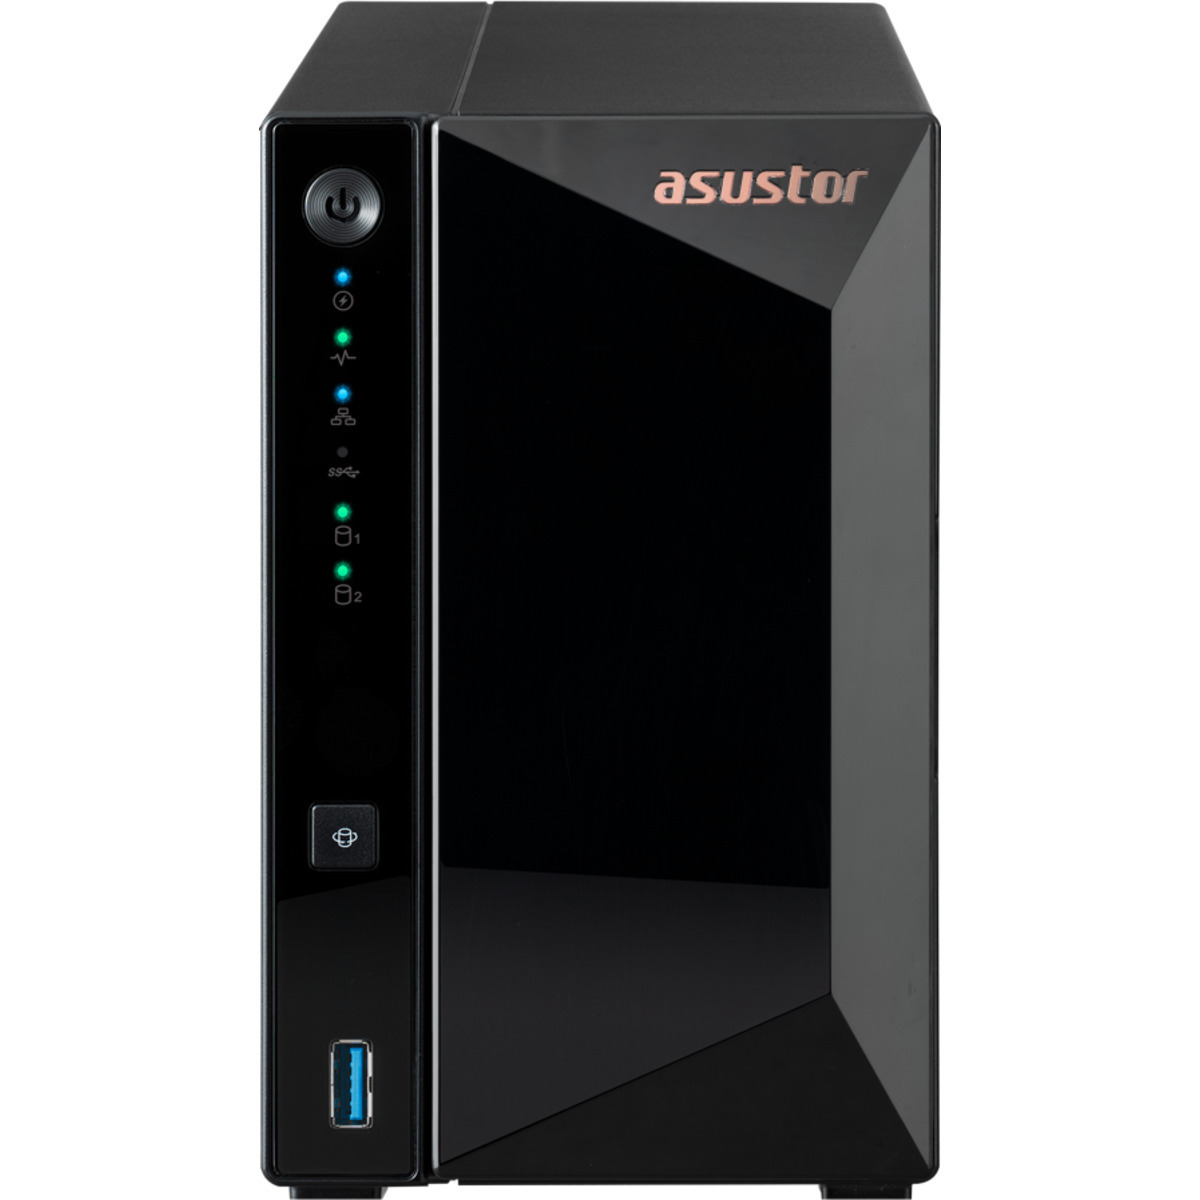 ASUSTOR DRIVESTOR 2 Pro AS3302T 8tb 2-Bay Desktop Personal / Basic Home / Small Office NAS - Network Attached Storage Device 2x4tb Western Digital Red Pro WD4003FFBX 3.5 7200rpm SATA 6Gb/s HDD NAS Class Drives Installed - Burn-In Tested DRIVESTOR 2 Pro AS3302T